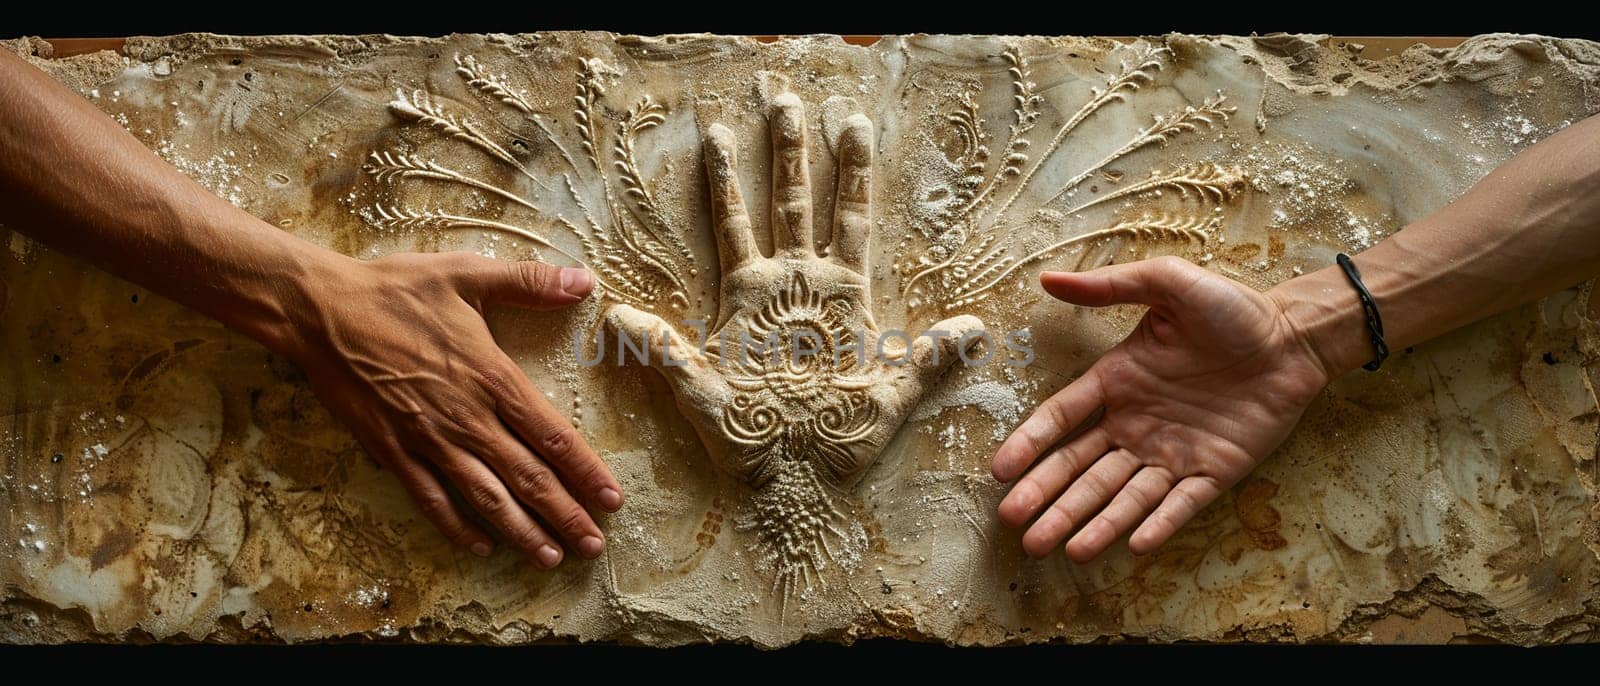 Vodou Veve Symbols Drawn in Flour for a Ceremony, The intricate lines spread out, carrying the power of connection to the divine.